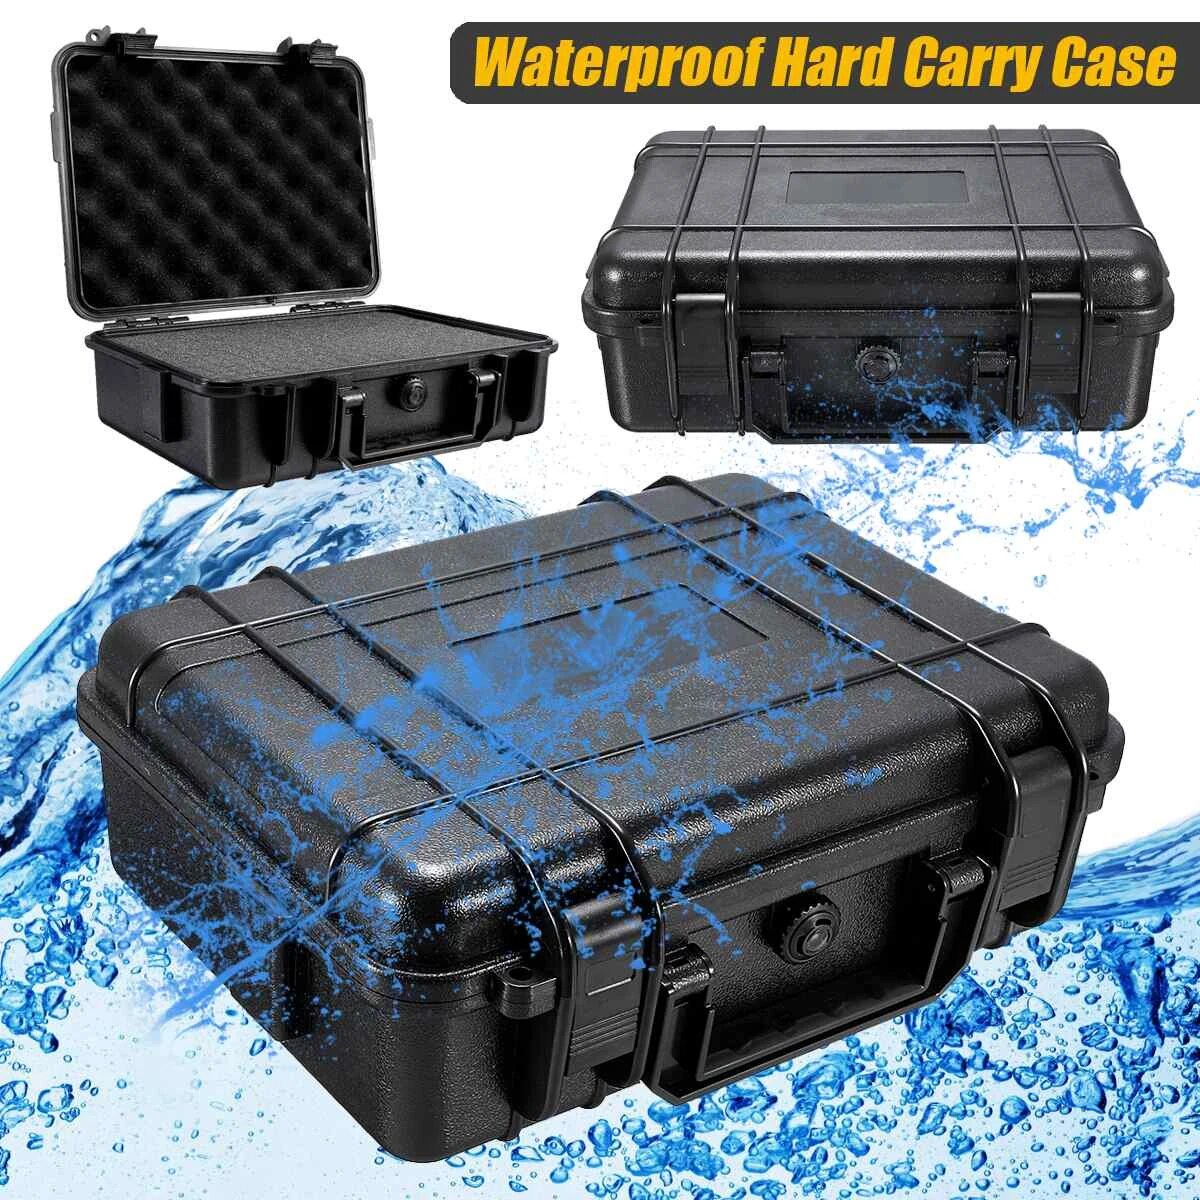 7 Sizes Waterproof Hard Carry Case Bag Tool Kits with Sponge Storage Box Safety Protector Organizer Hardware Toolbox